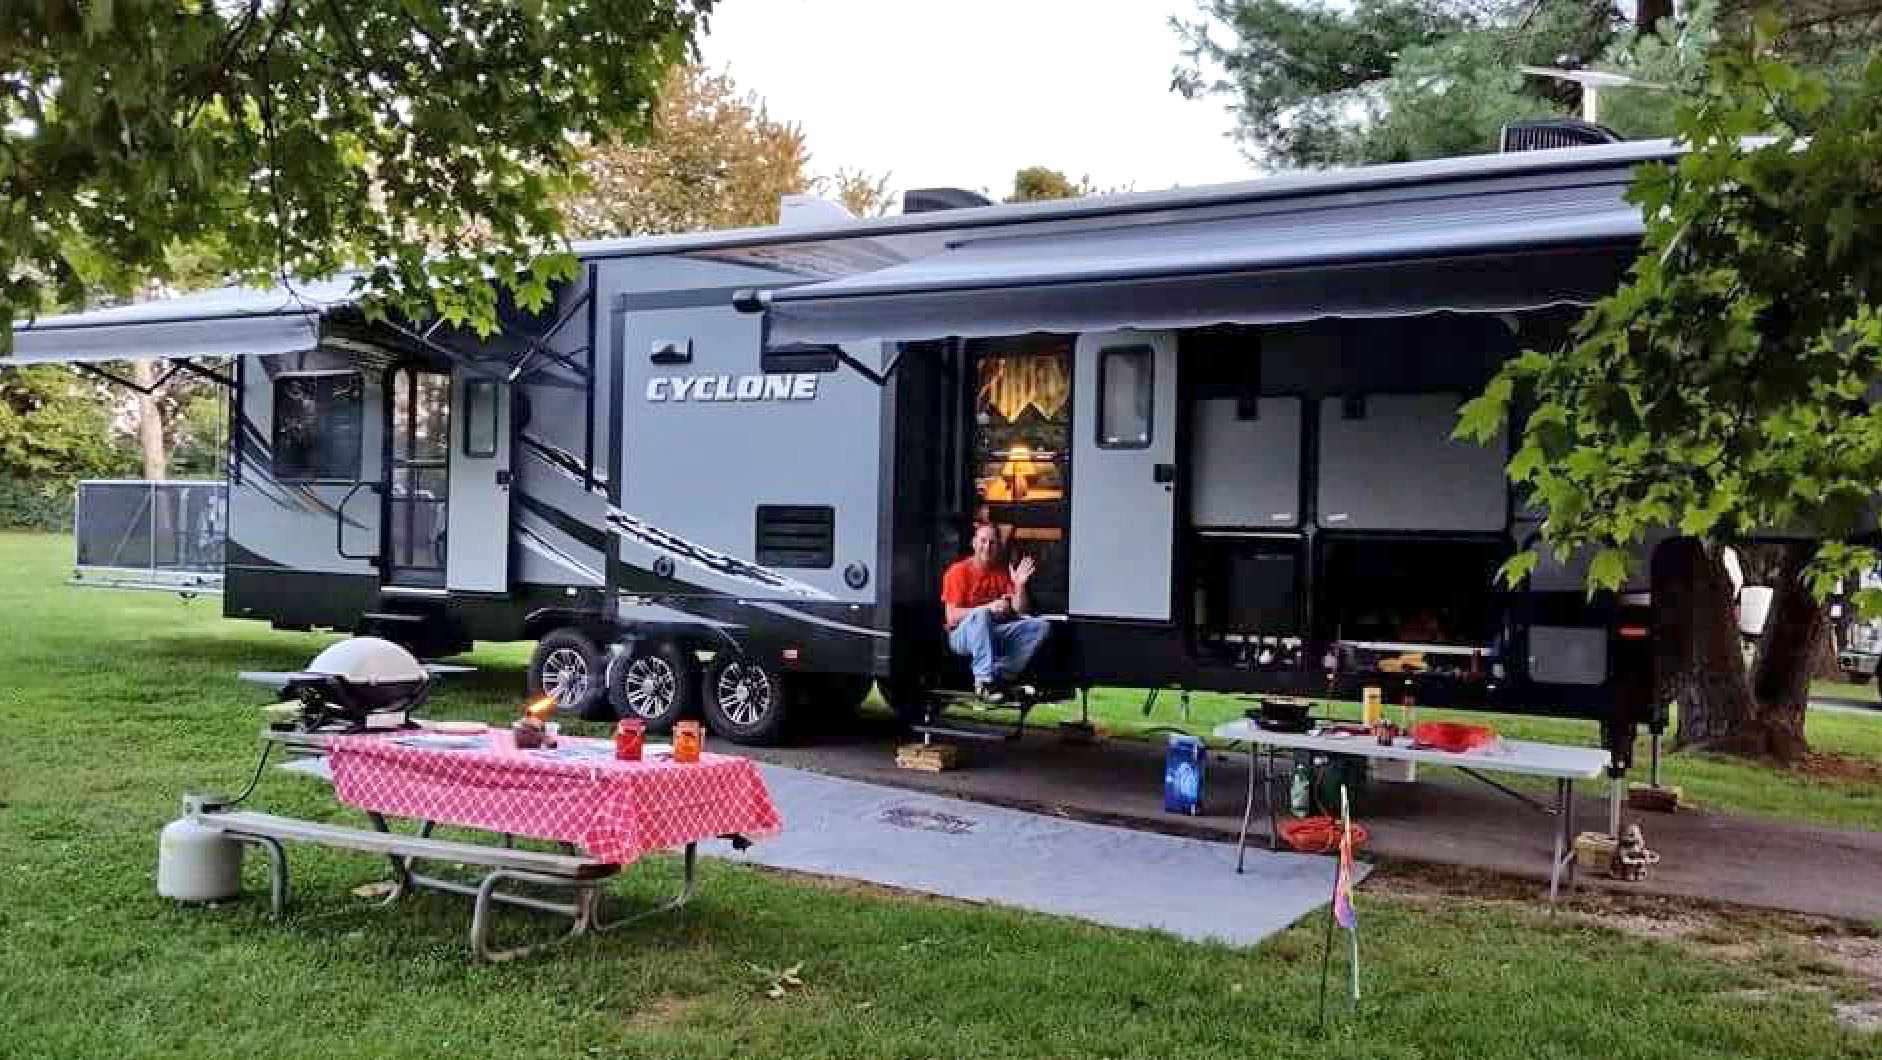 A comprehensive checklist for your next RV camping trip